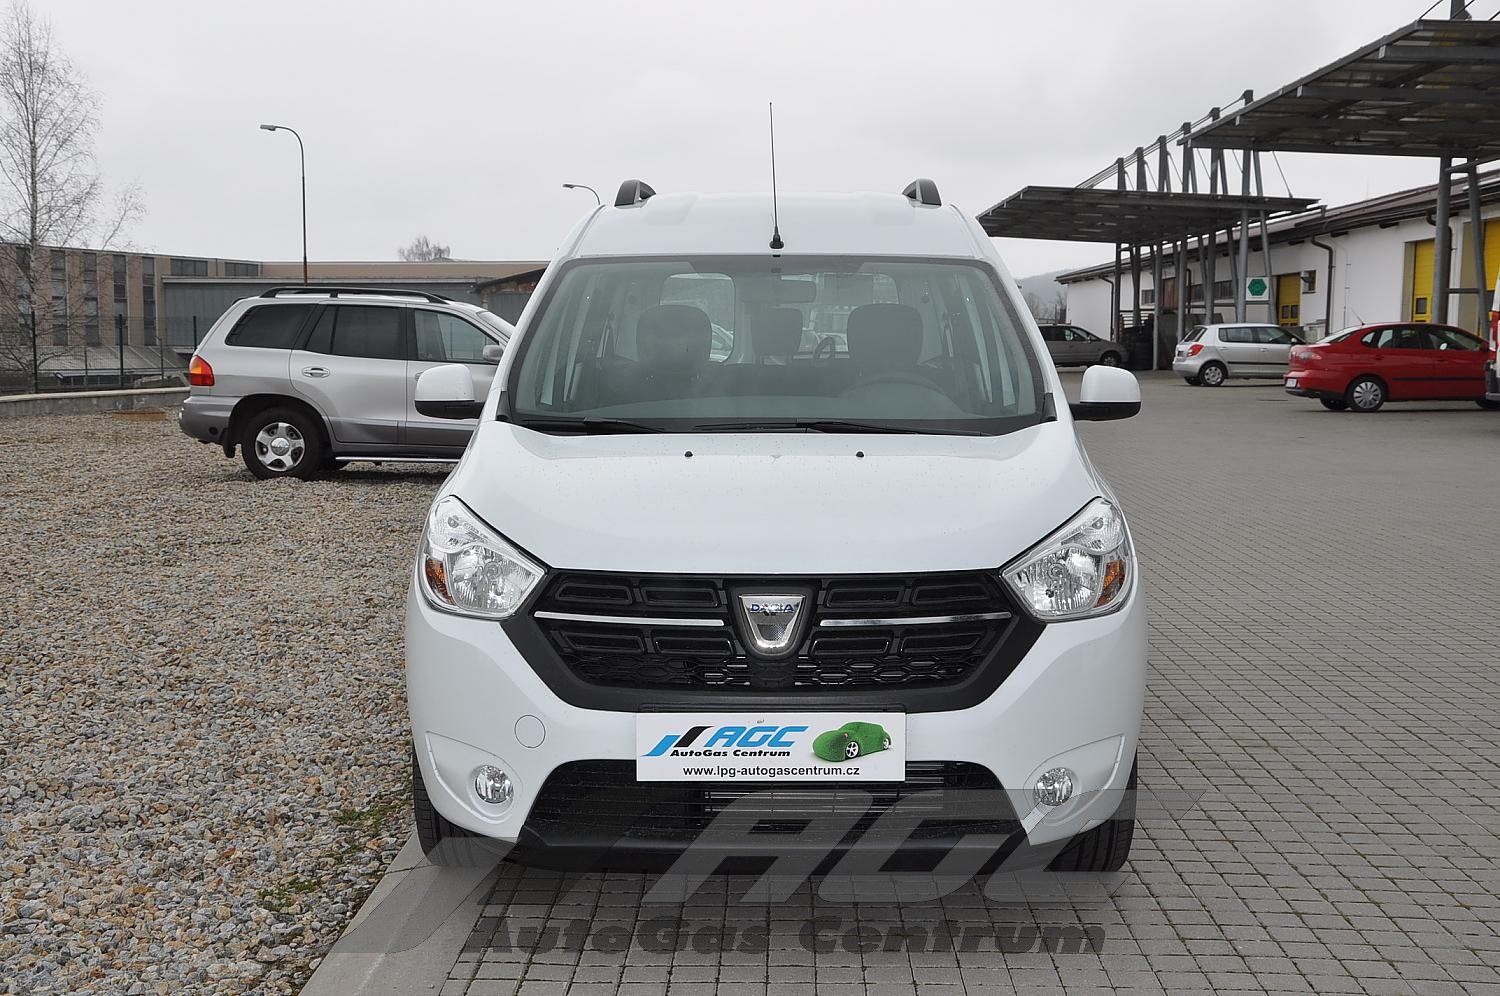 Dacia Lodgy and Dokker LPG - big and cheap